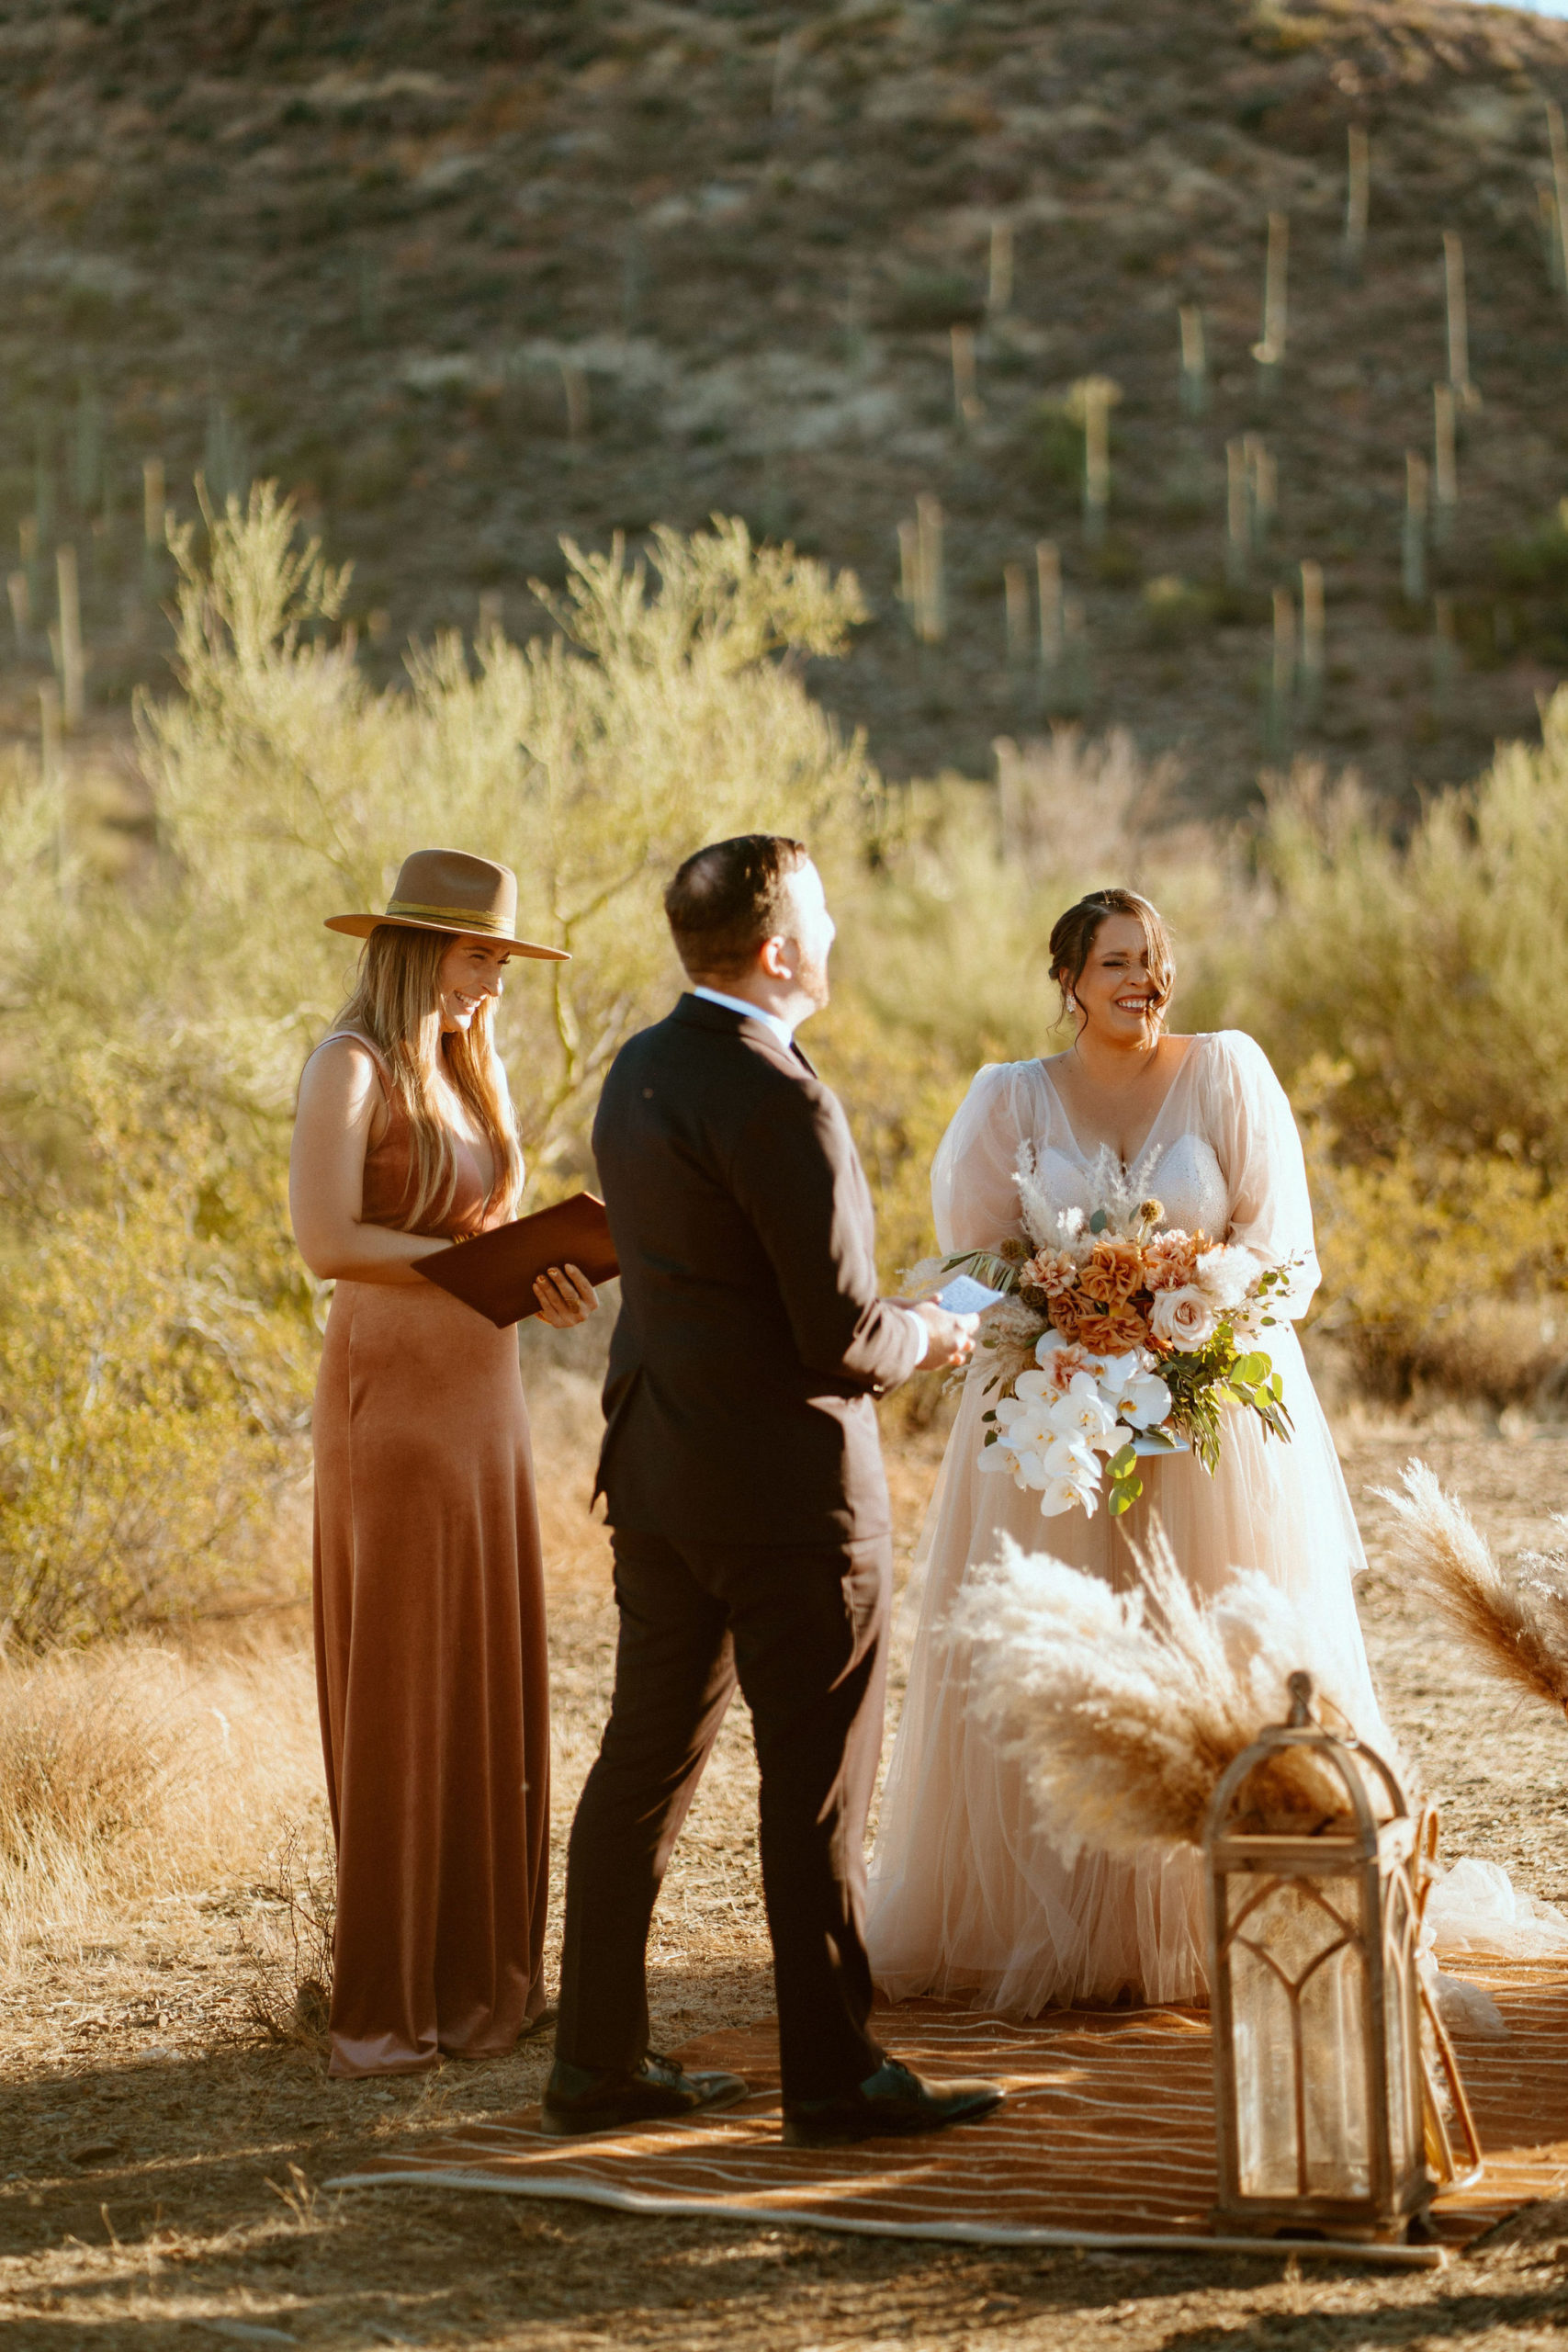 Saguaro National Park Micro-Wedding. The bride and groom laughing at the grooms personal vows 